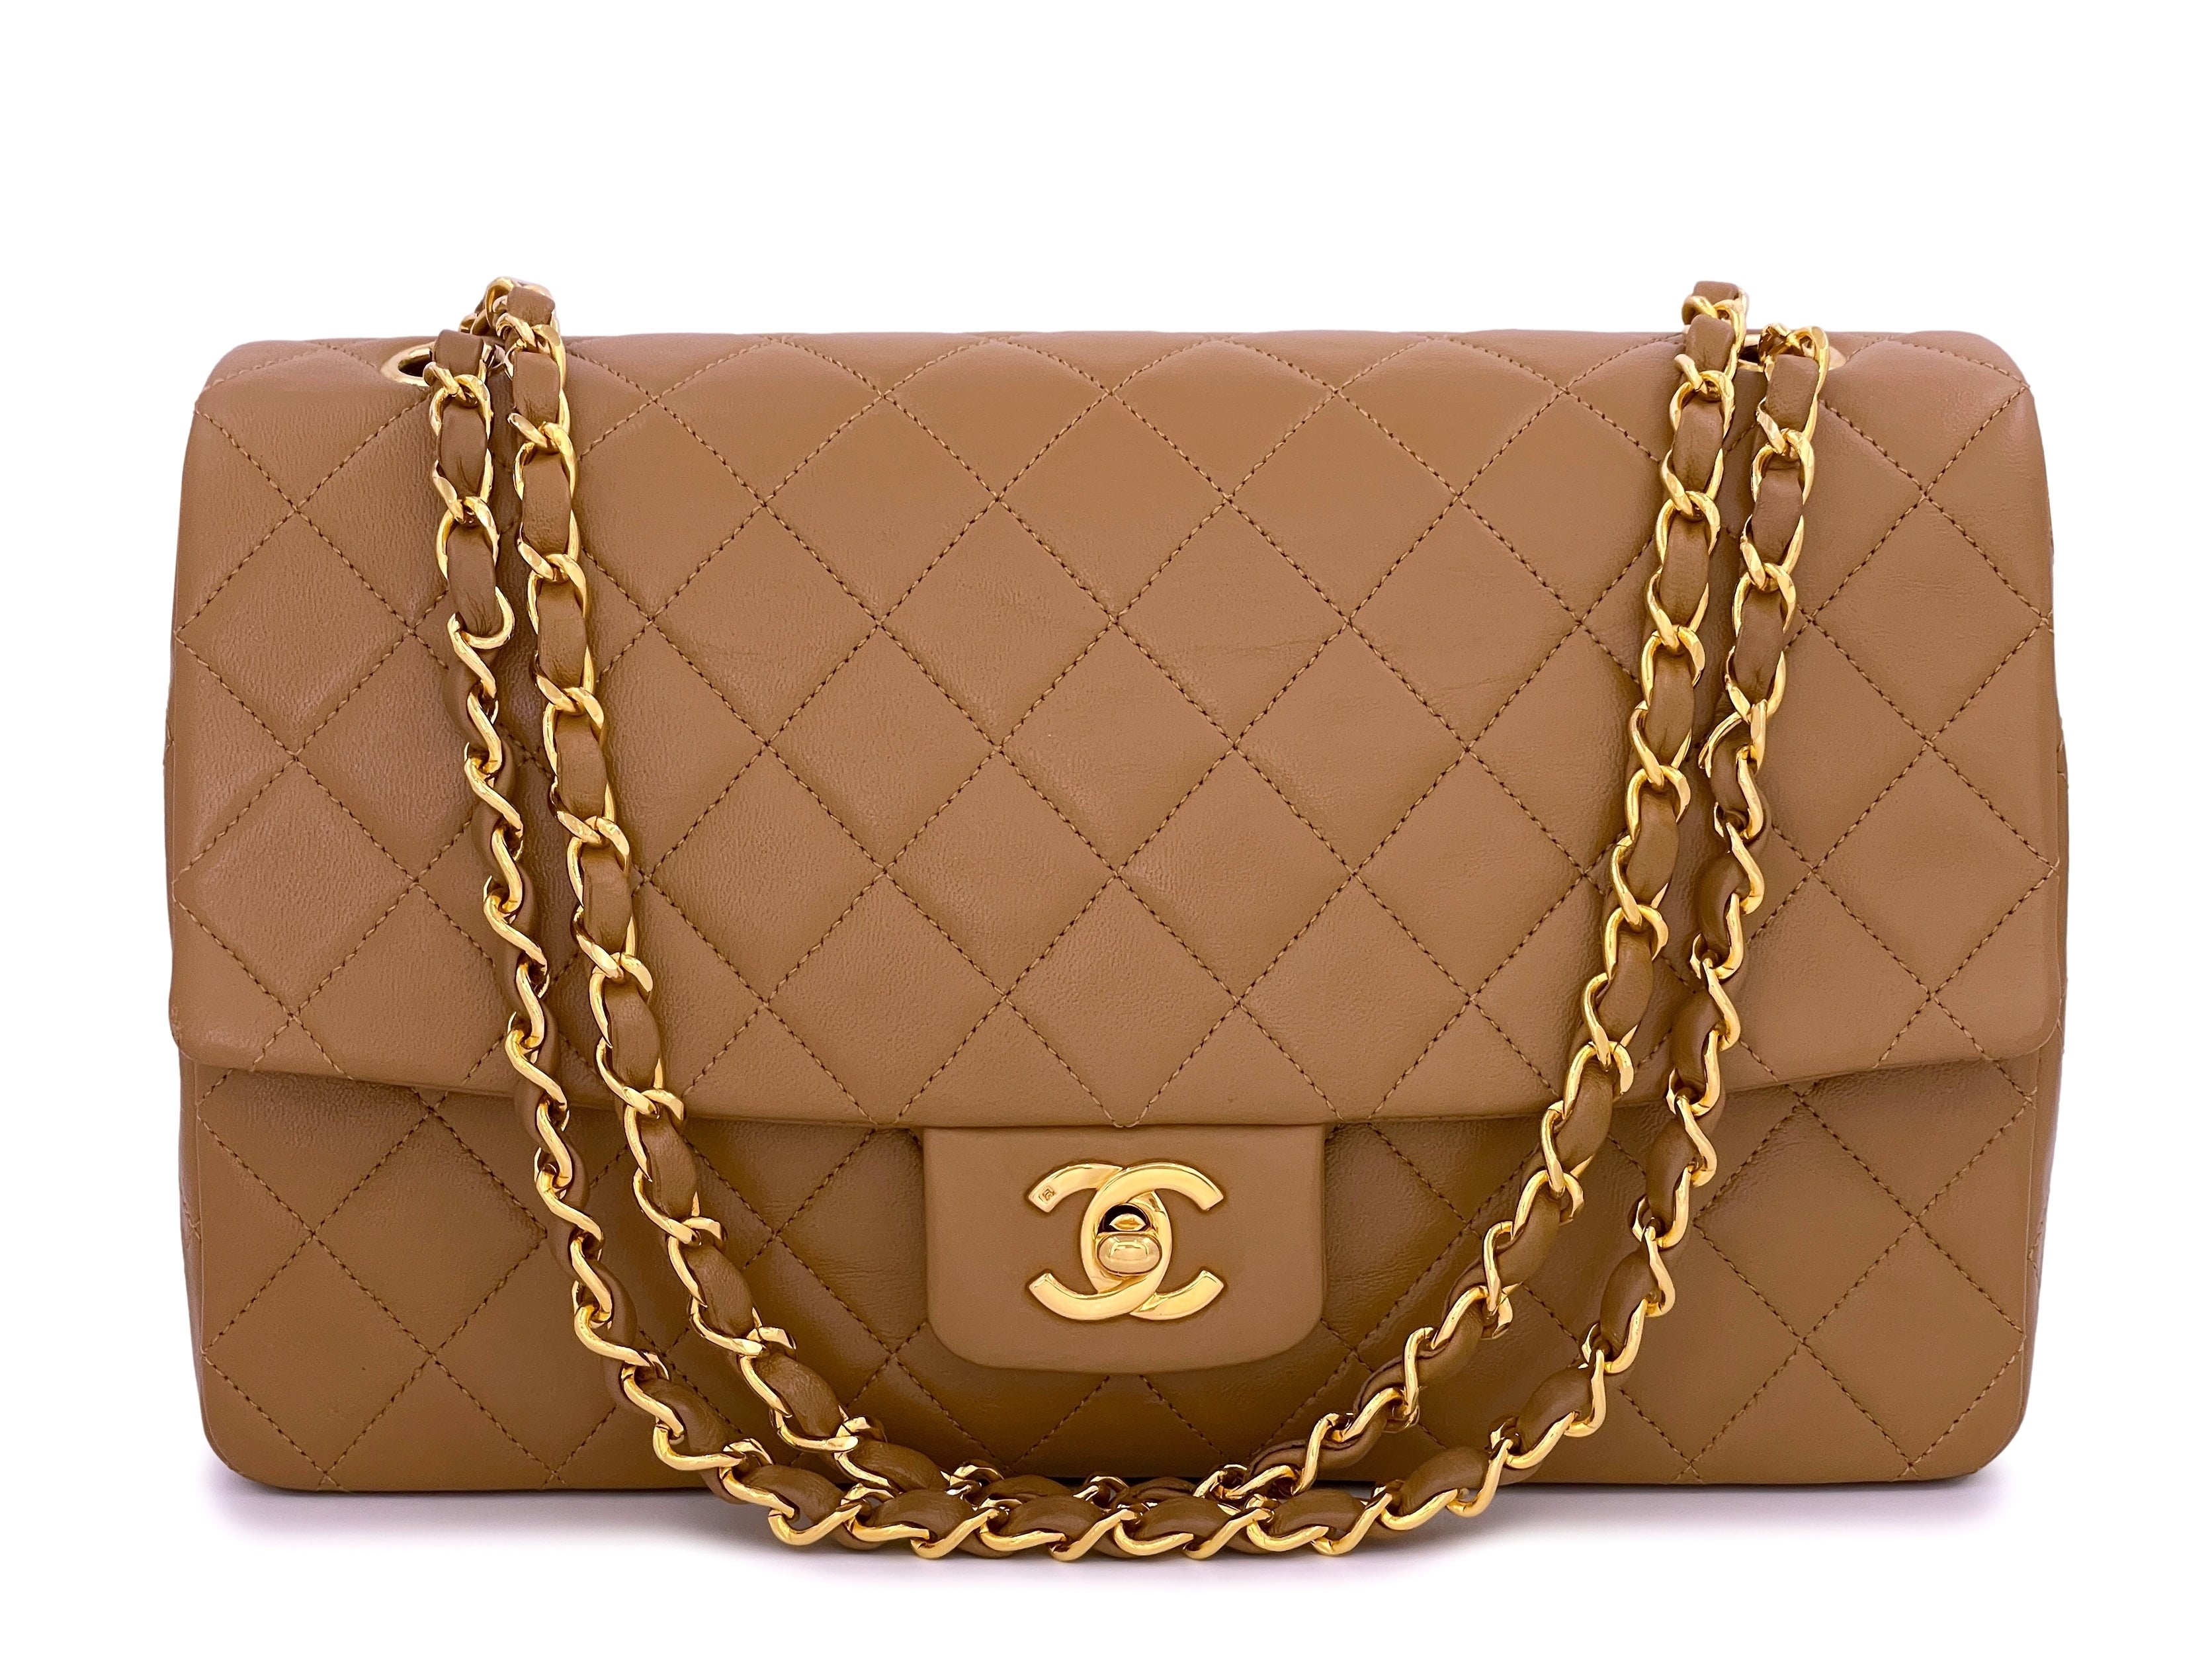 CHANEL CC TURNLOCK BROWN SUEDE LEATHER RED SHEARLING FLAP CLUTCH